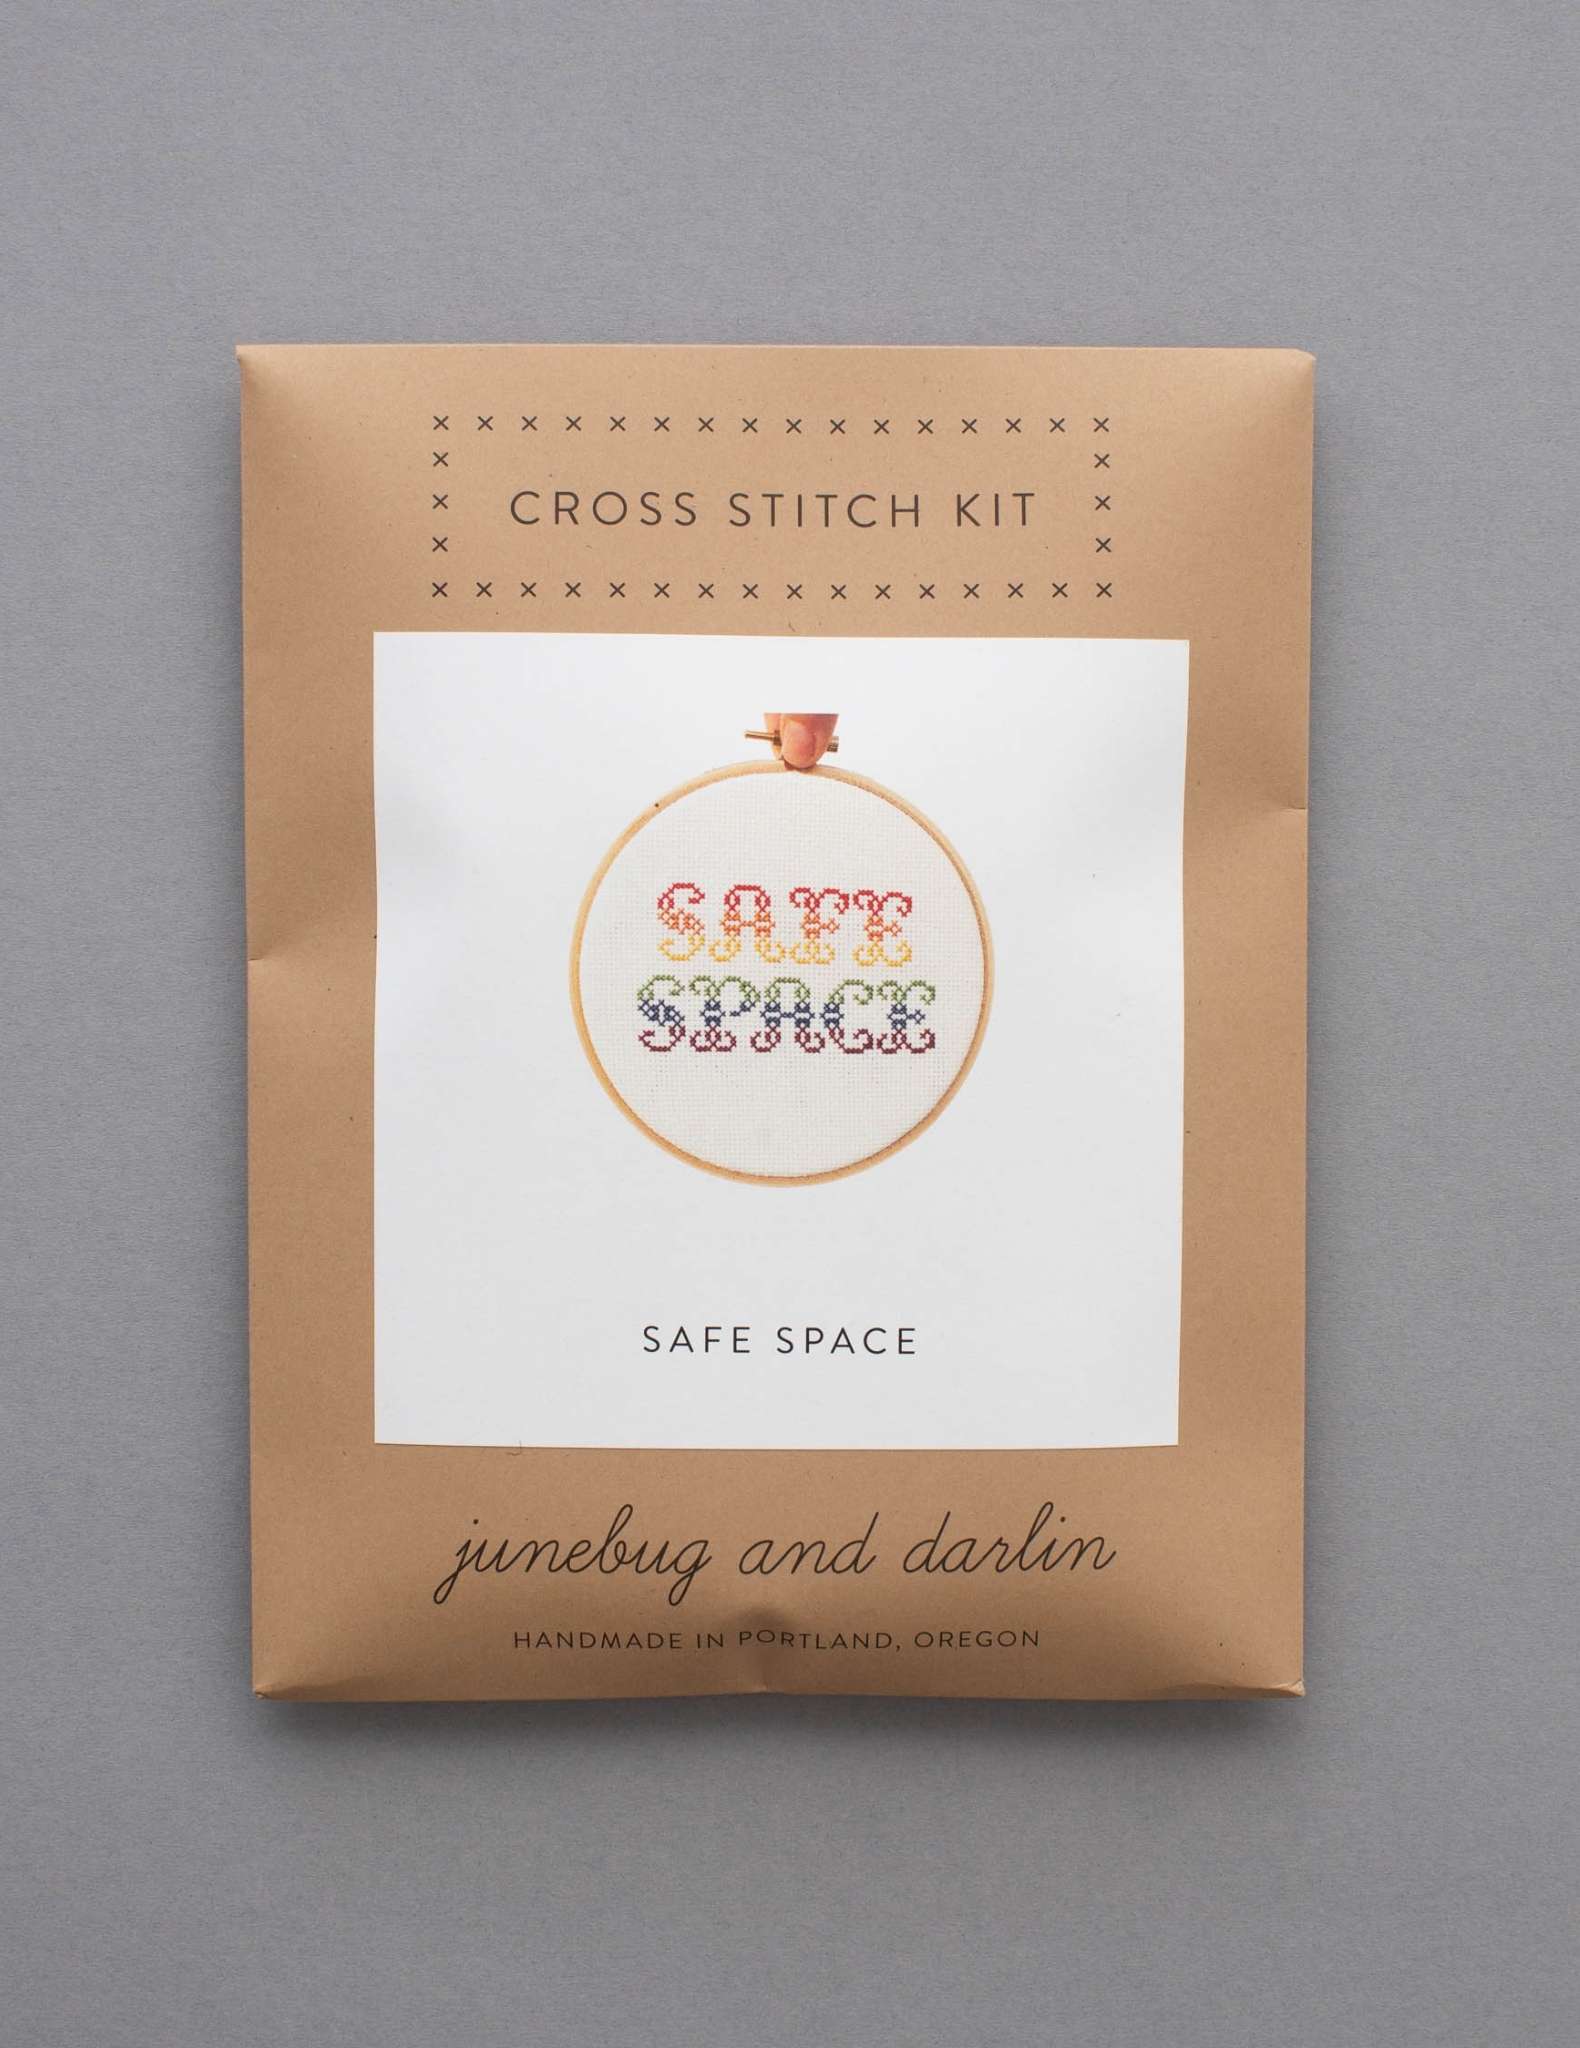 A cross stitch kit in a brown envelope showing a design in rainbow colours with the text 'Safe Space.'